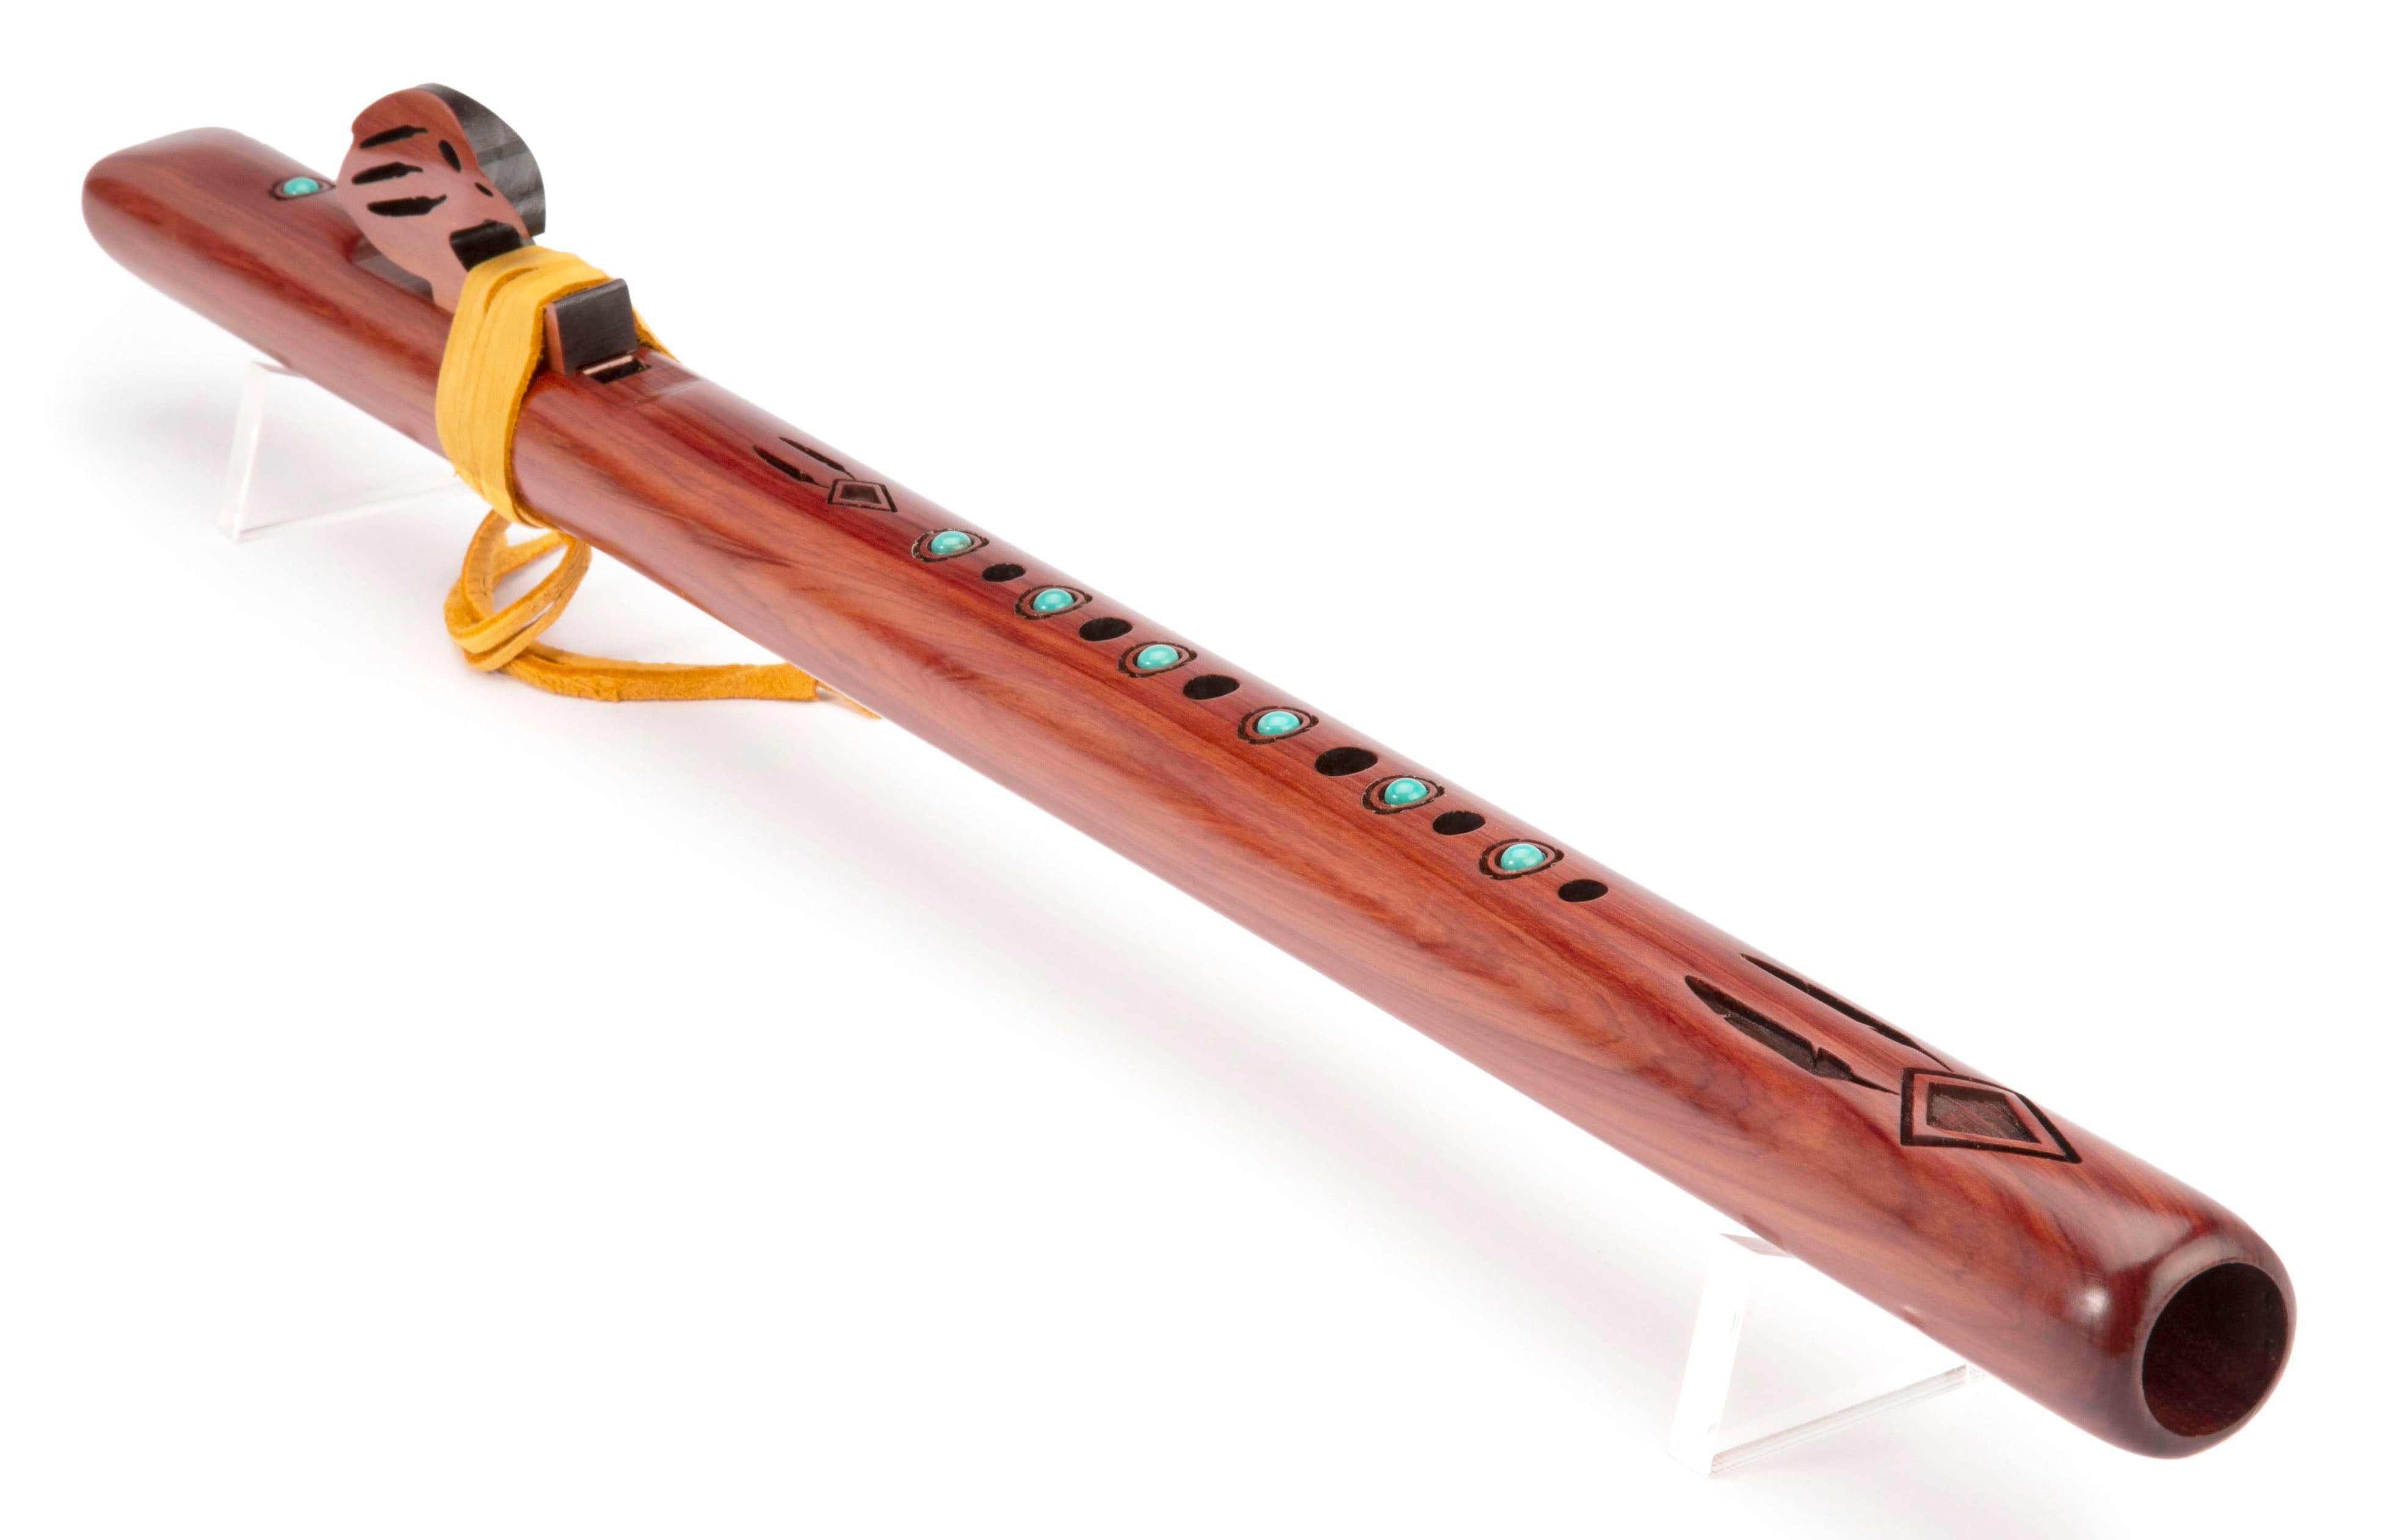 Preservation Golden Eagle "F♯" - Aromatic Cedar & Turquoise (all sales final)